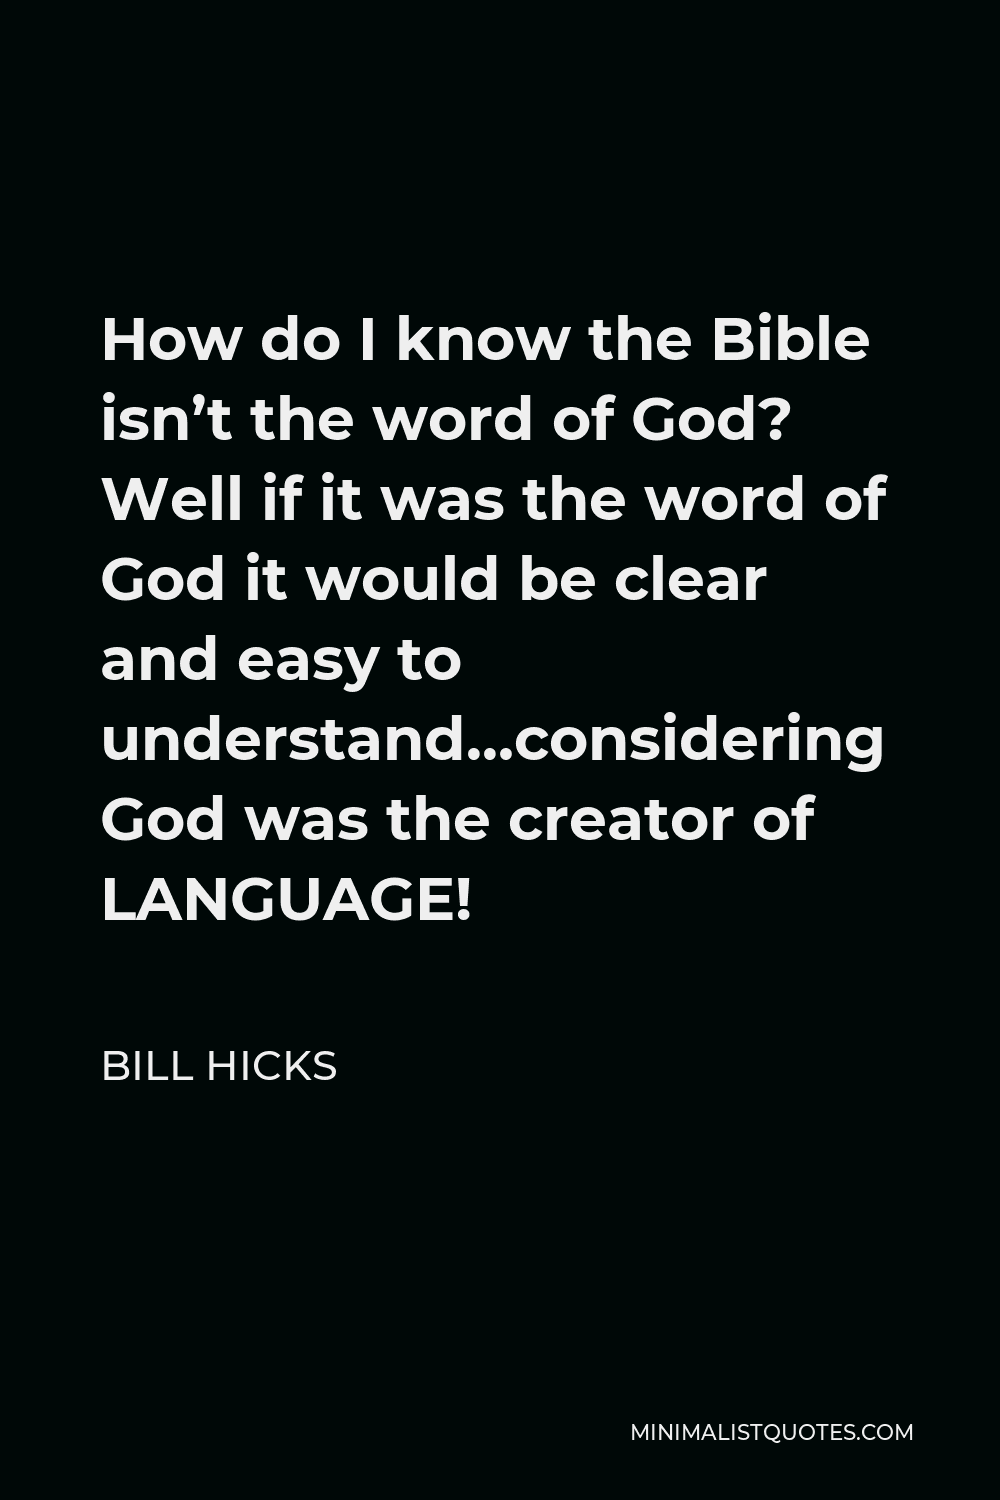 Bill Hicks Quote - How do I know the Bible isn’t the word of God? Well if it was the word of God it would be clear and easy to understand…considering God was the creator of LANGUAGE!